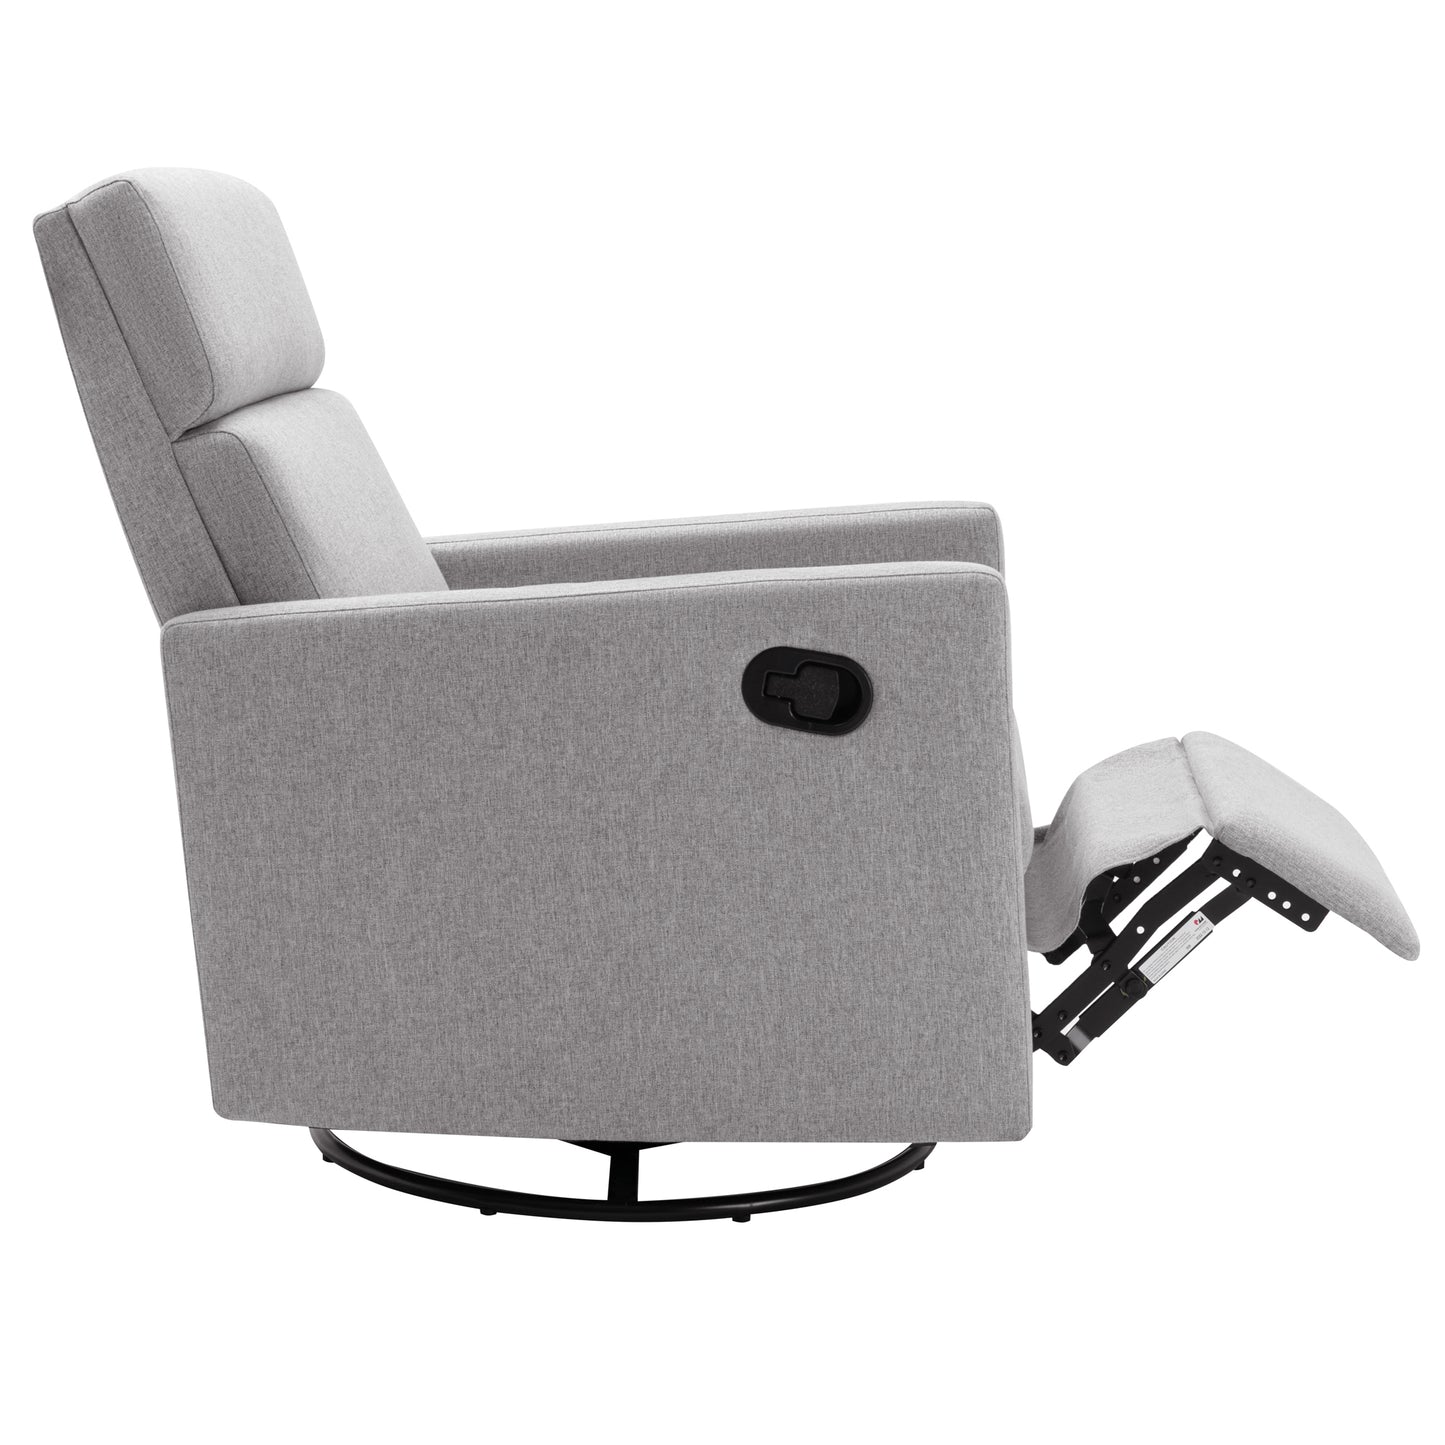 Gray Swivel Rocking Recliner Chair with Modern Design